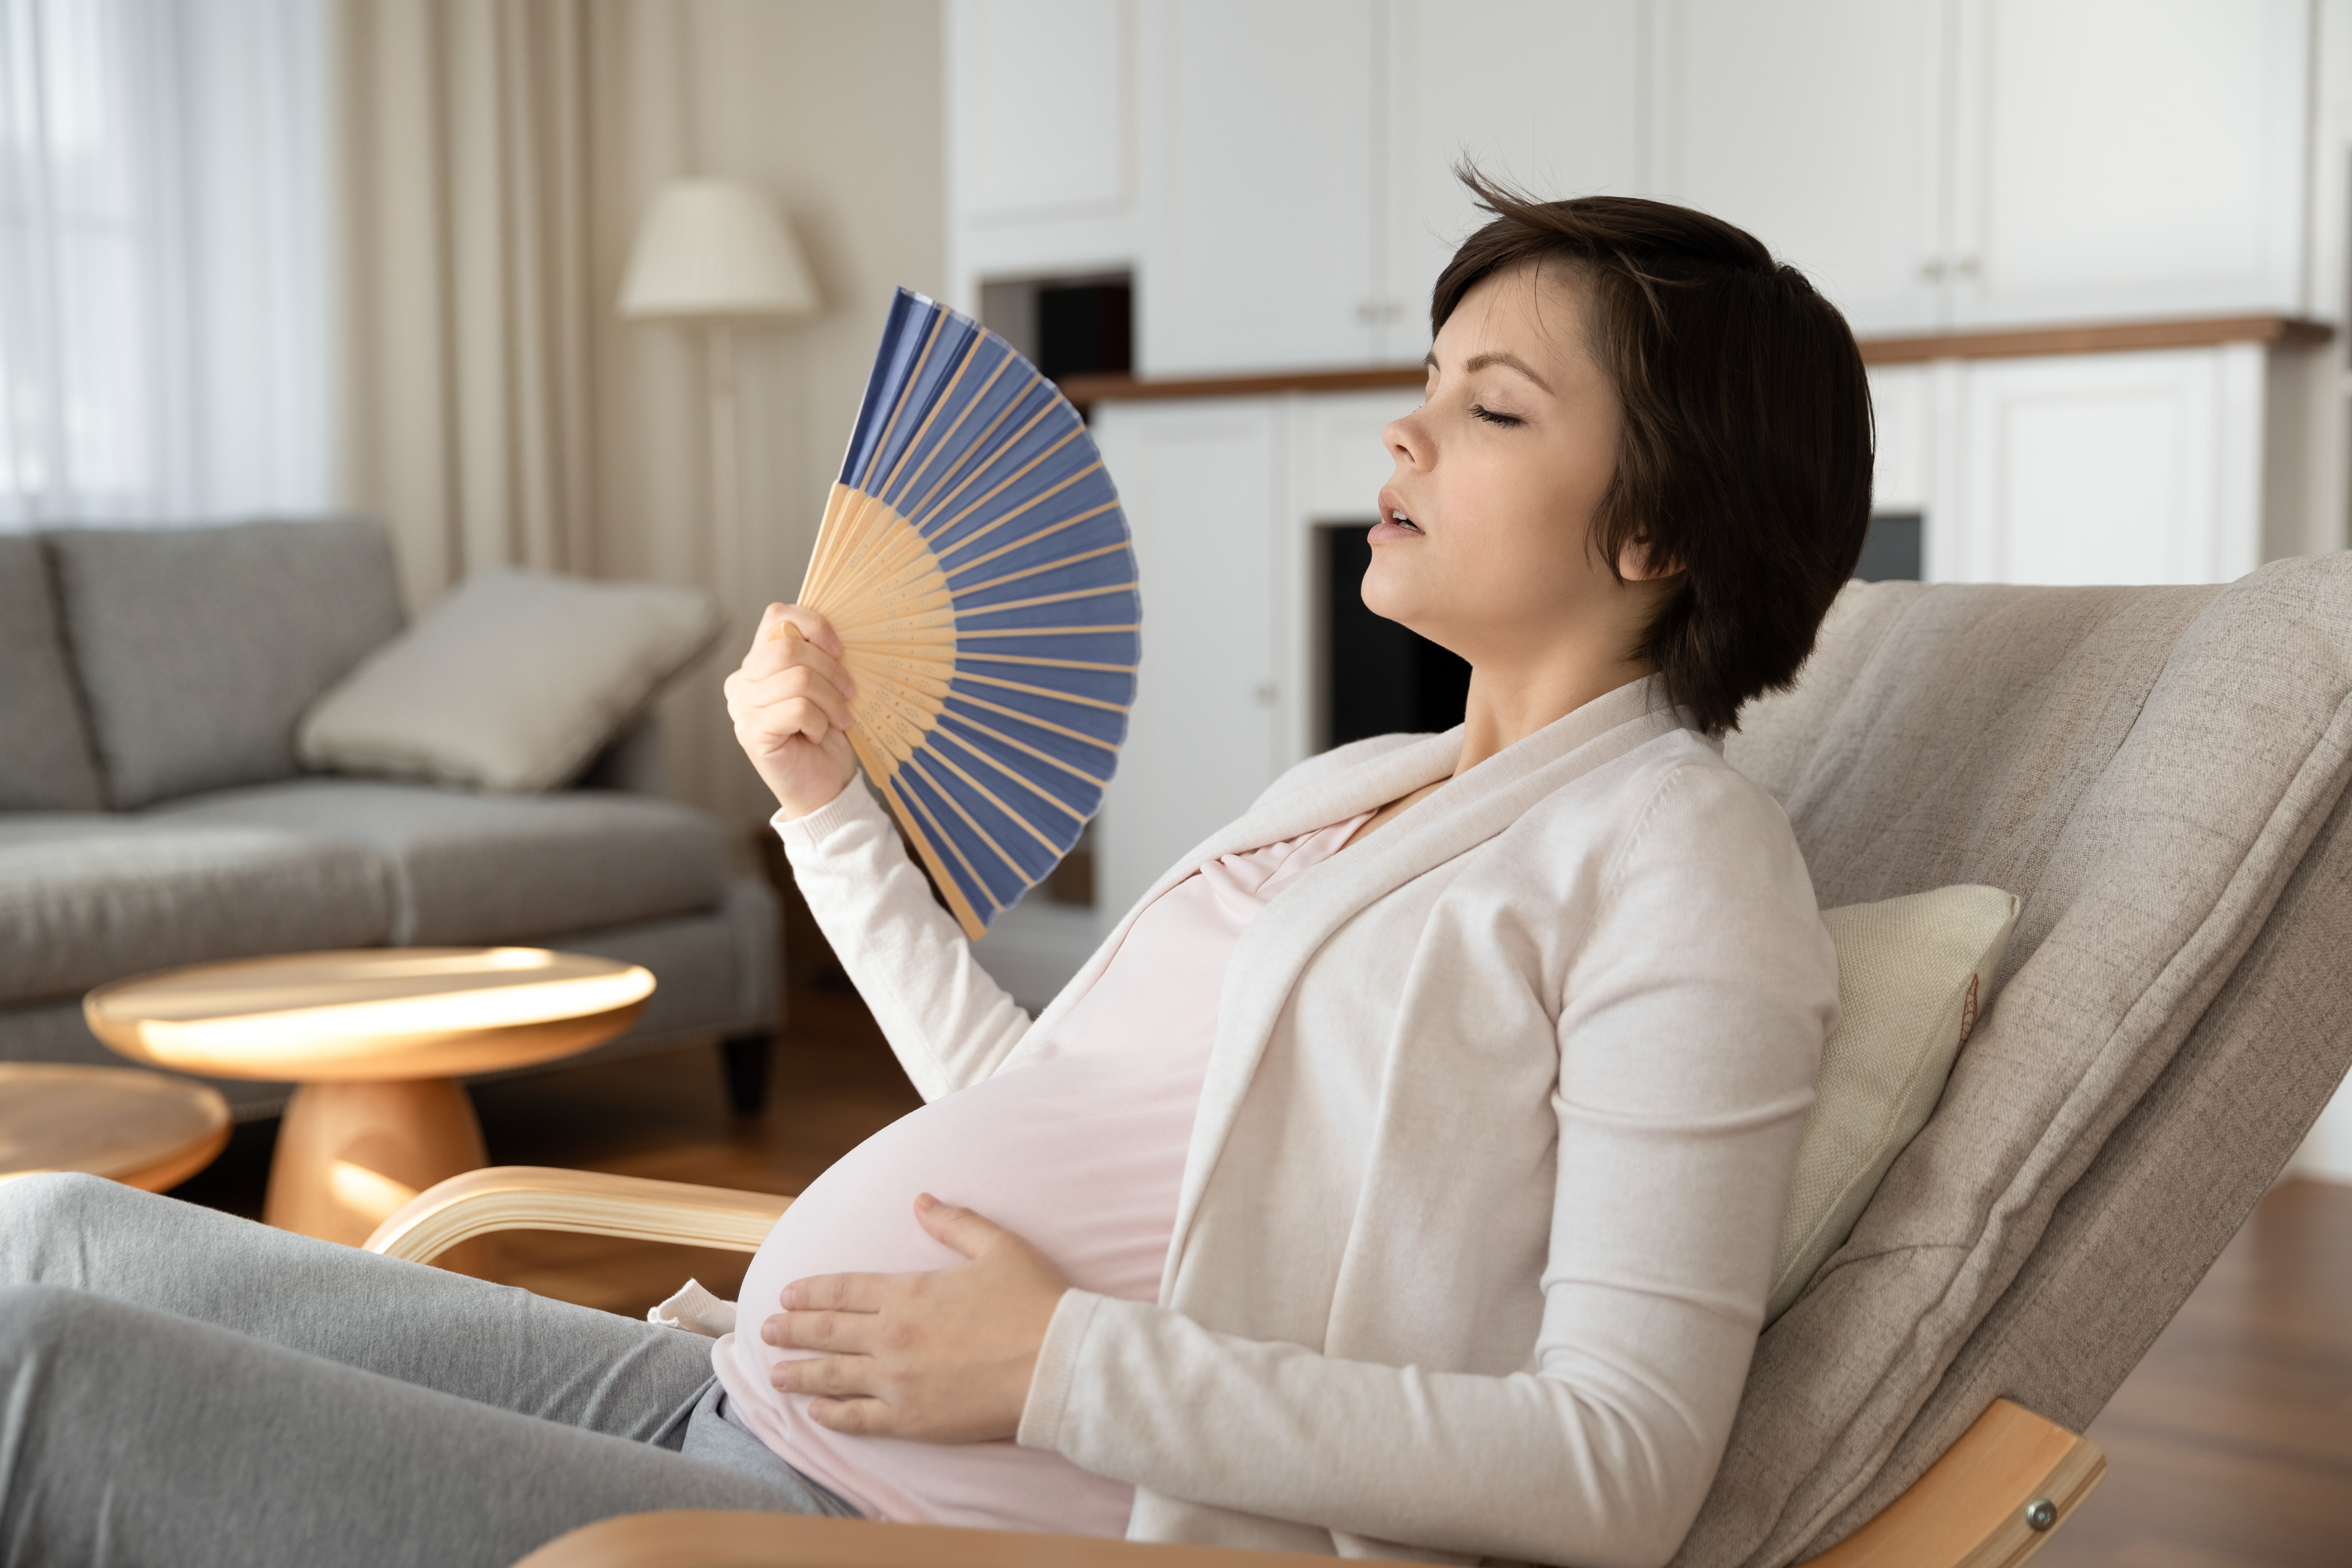 Pregnant woman sitting and fanning herself with eyes closed